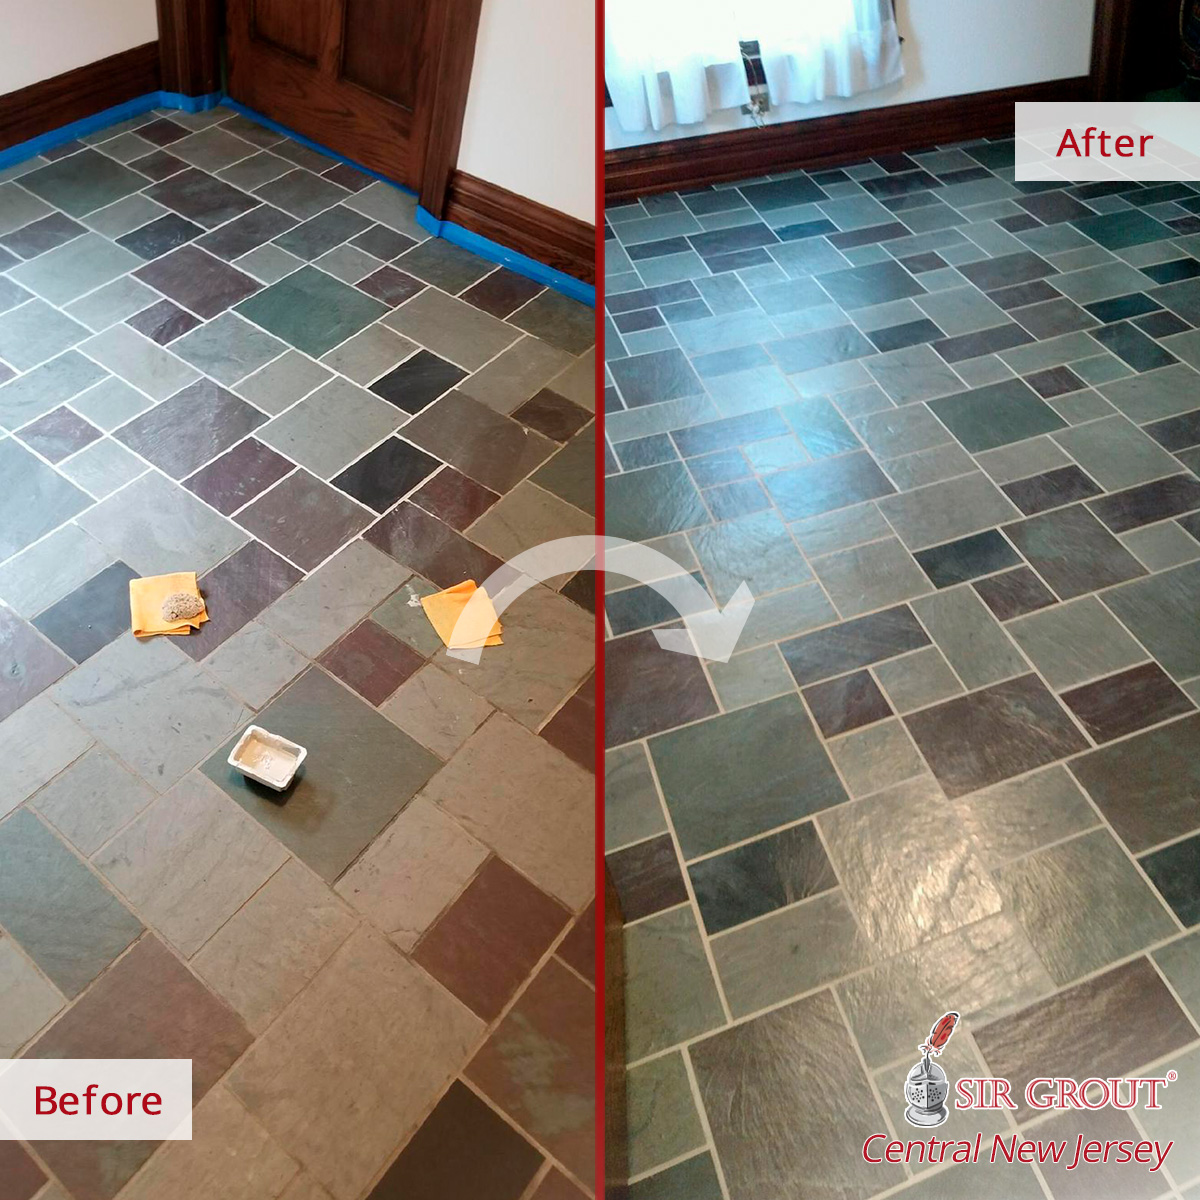 This Tile Floor in Hamilton Looks Amazing Thanks to Our Grout Cleaning  Services